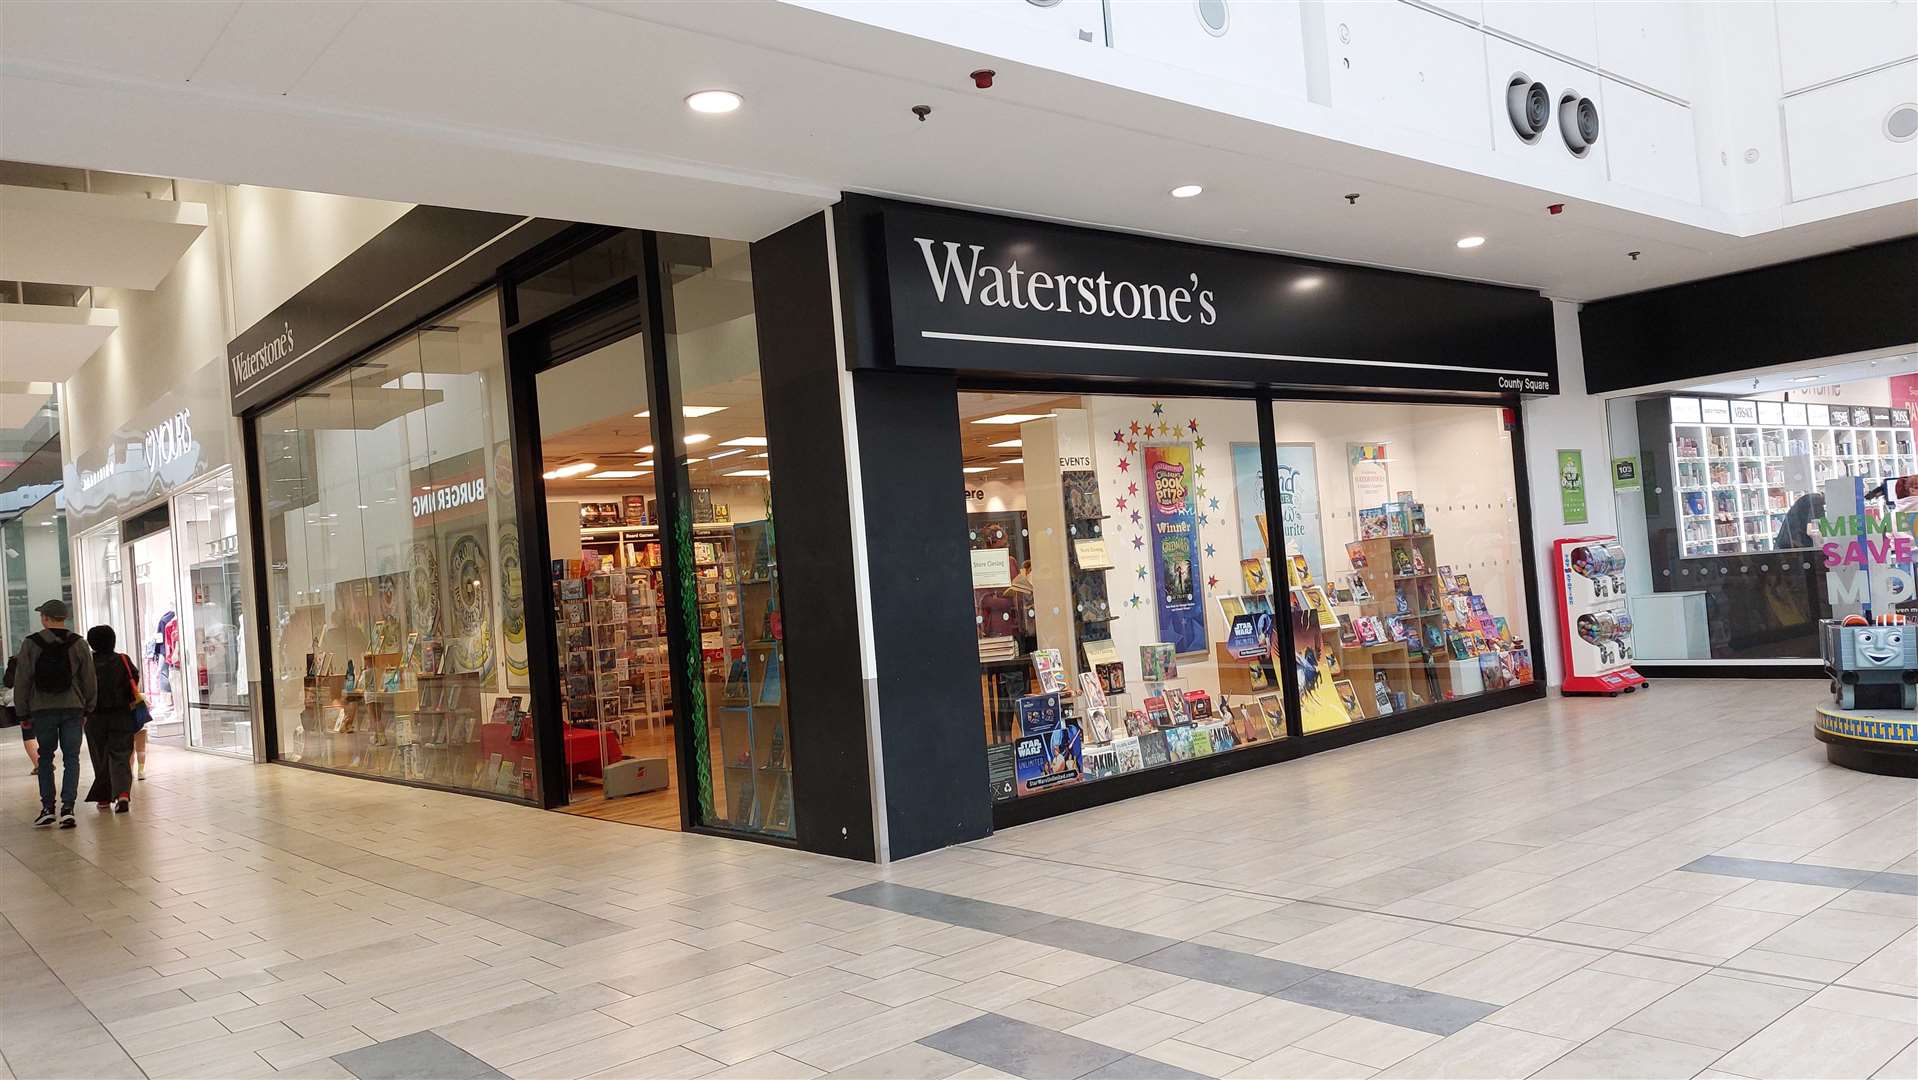 Waterstones in County Square, Ashford, is set to close